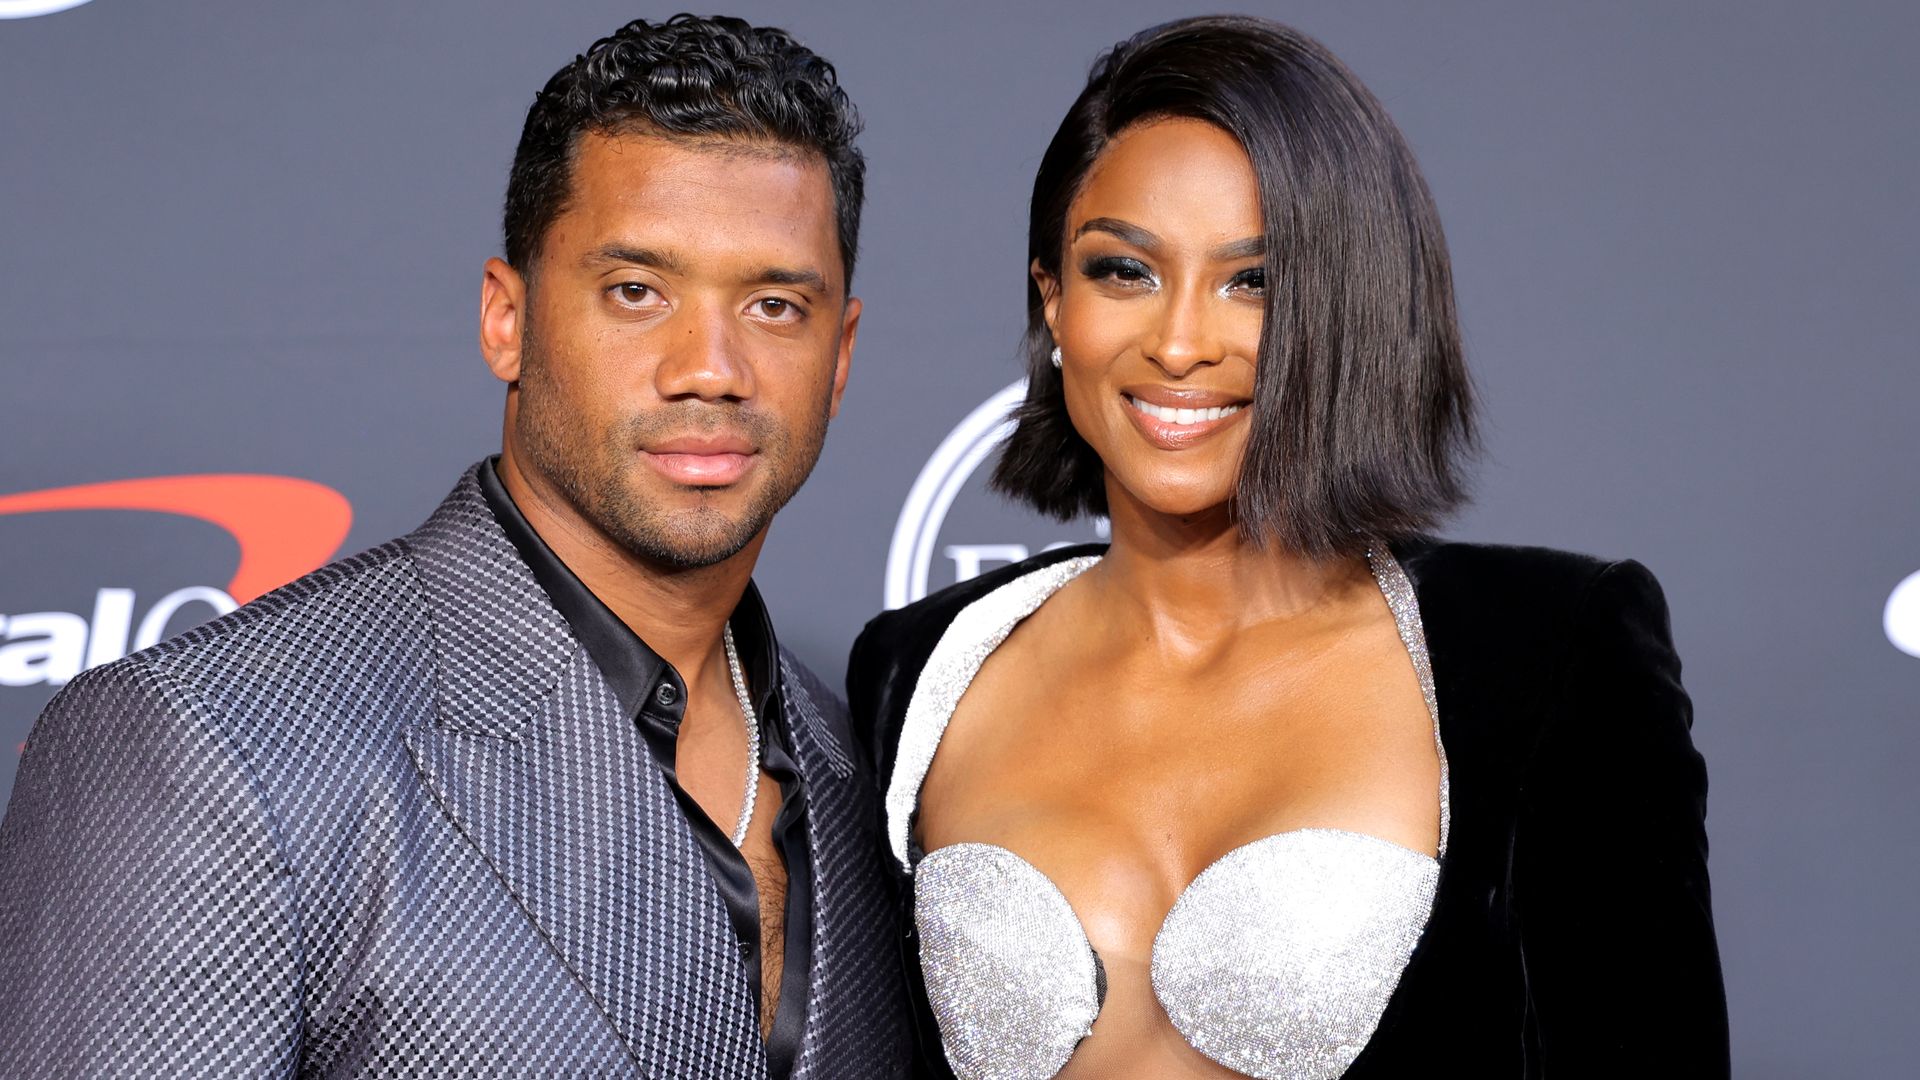 Ciara and Russell smiling at a red carpet event